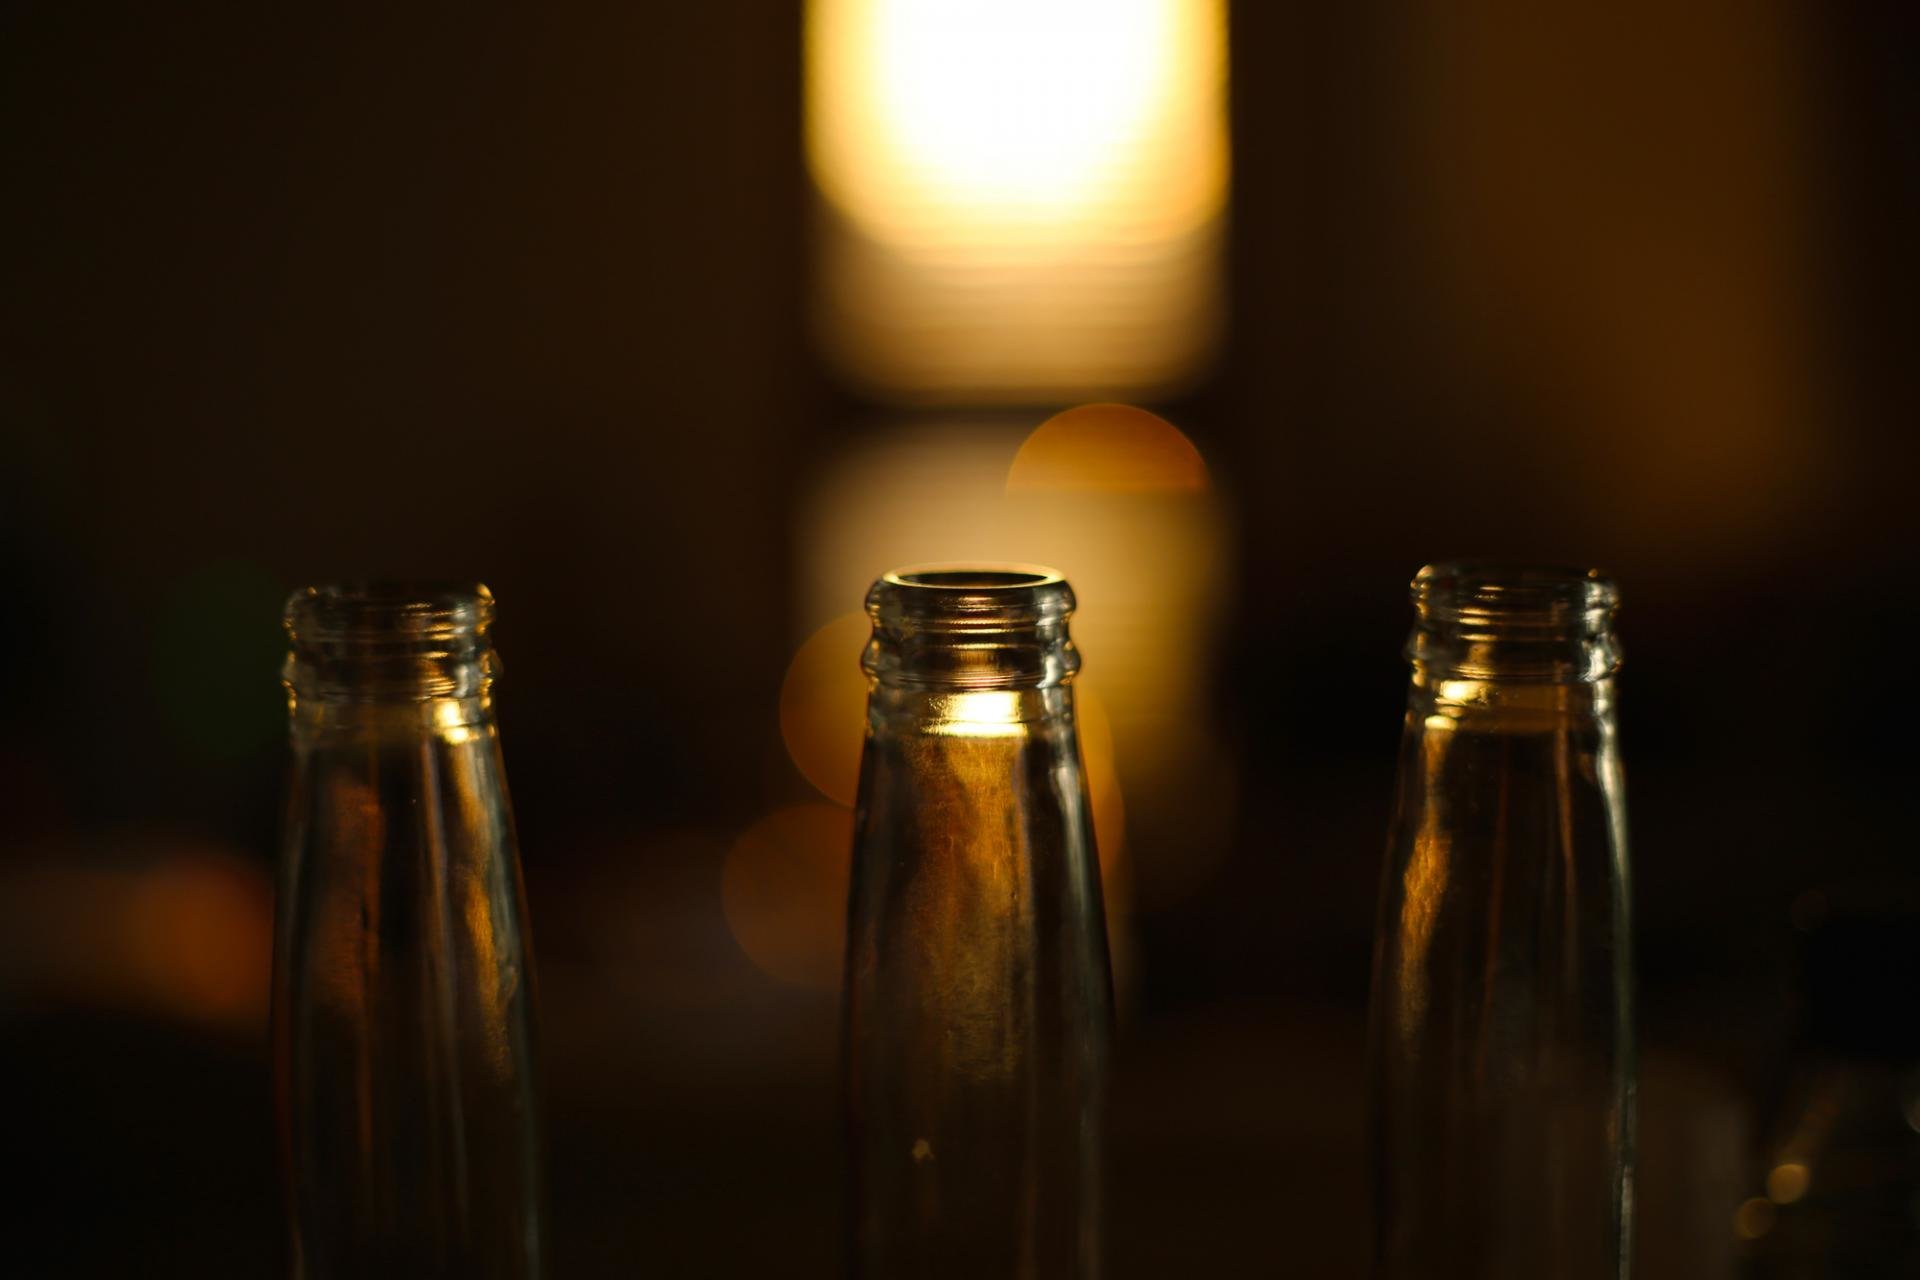 Awesome Bottle free wallpaper ID:21817 for hd 1920x1280 computer